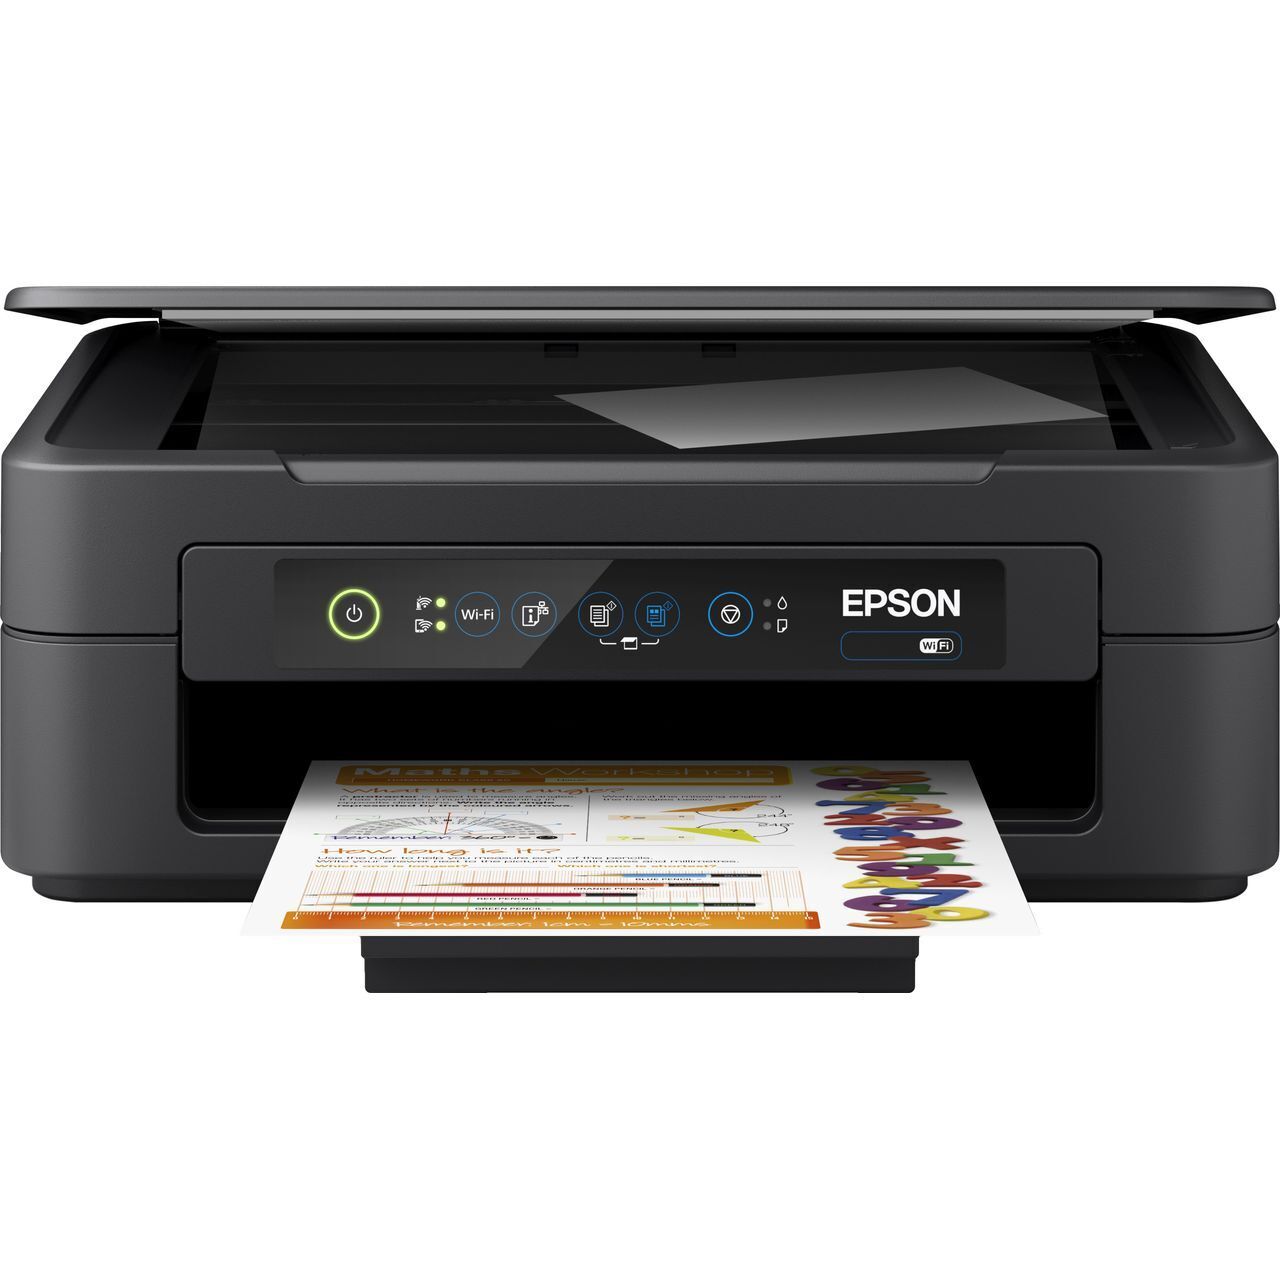 Epson Expression Home XP-2200 Inkjet Printer WiFi Connection Only